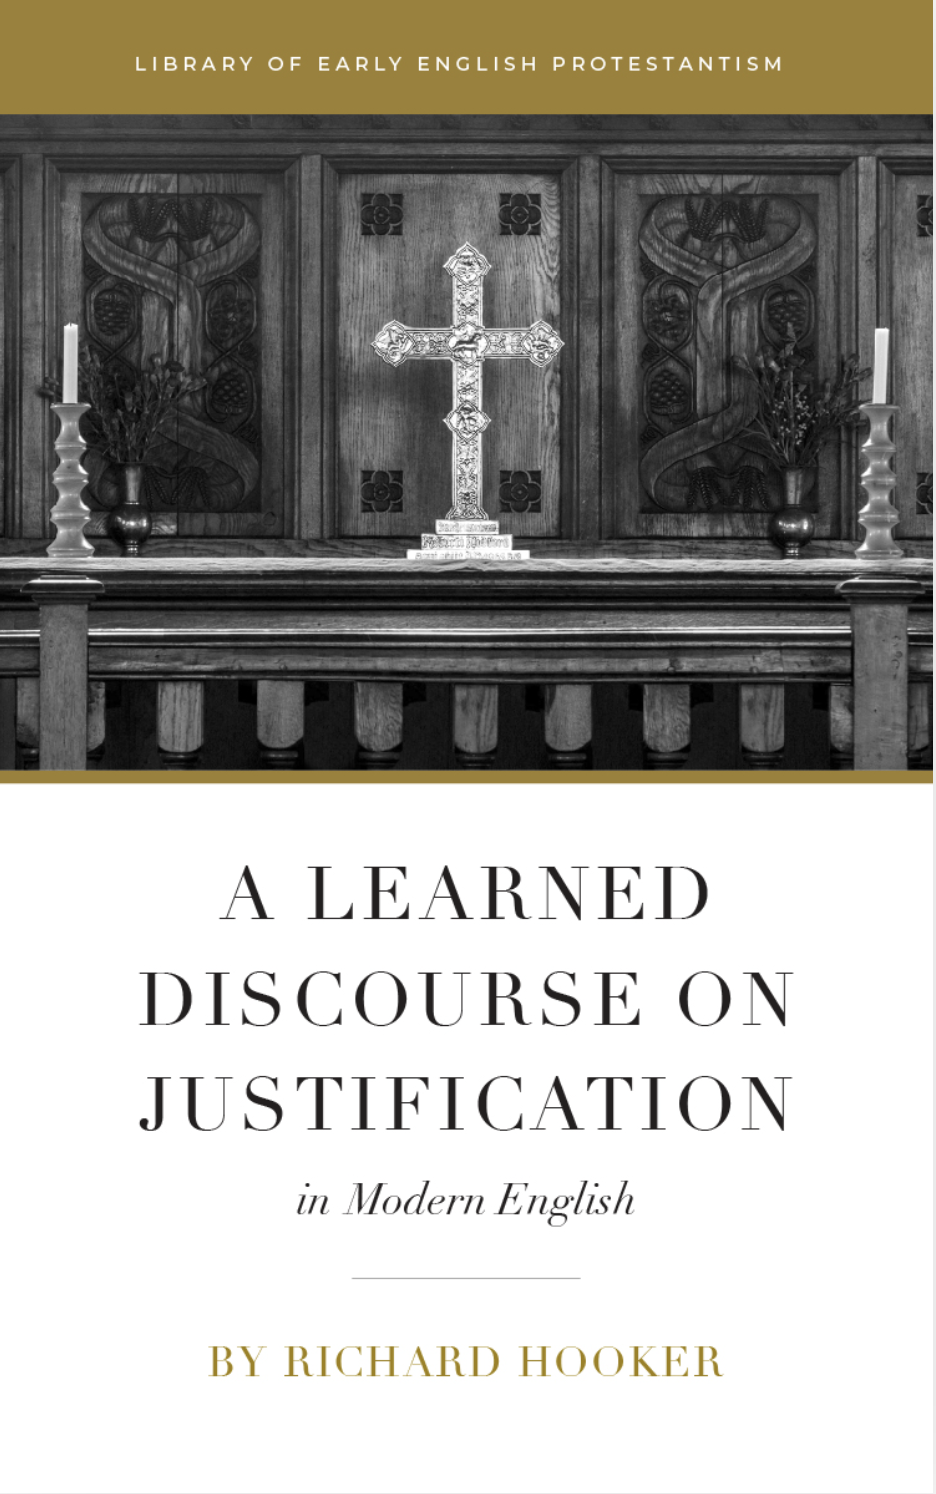 A Learned Discourse on Justification in Modern English